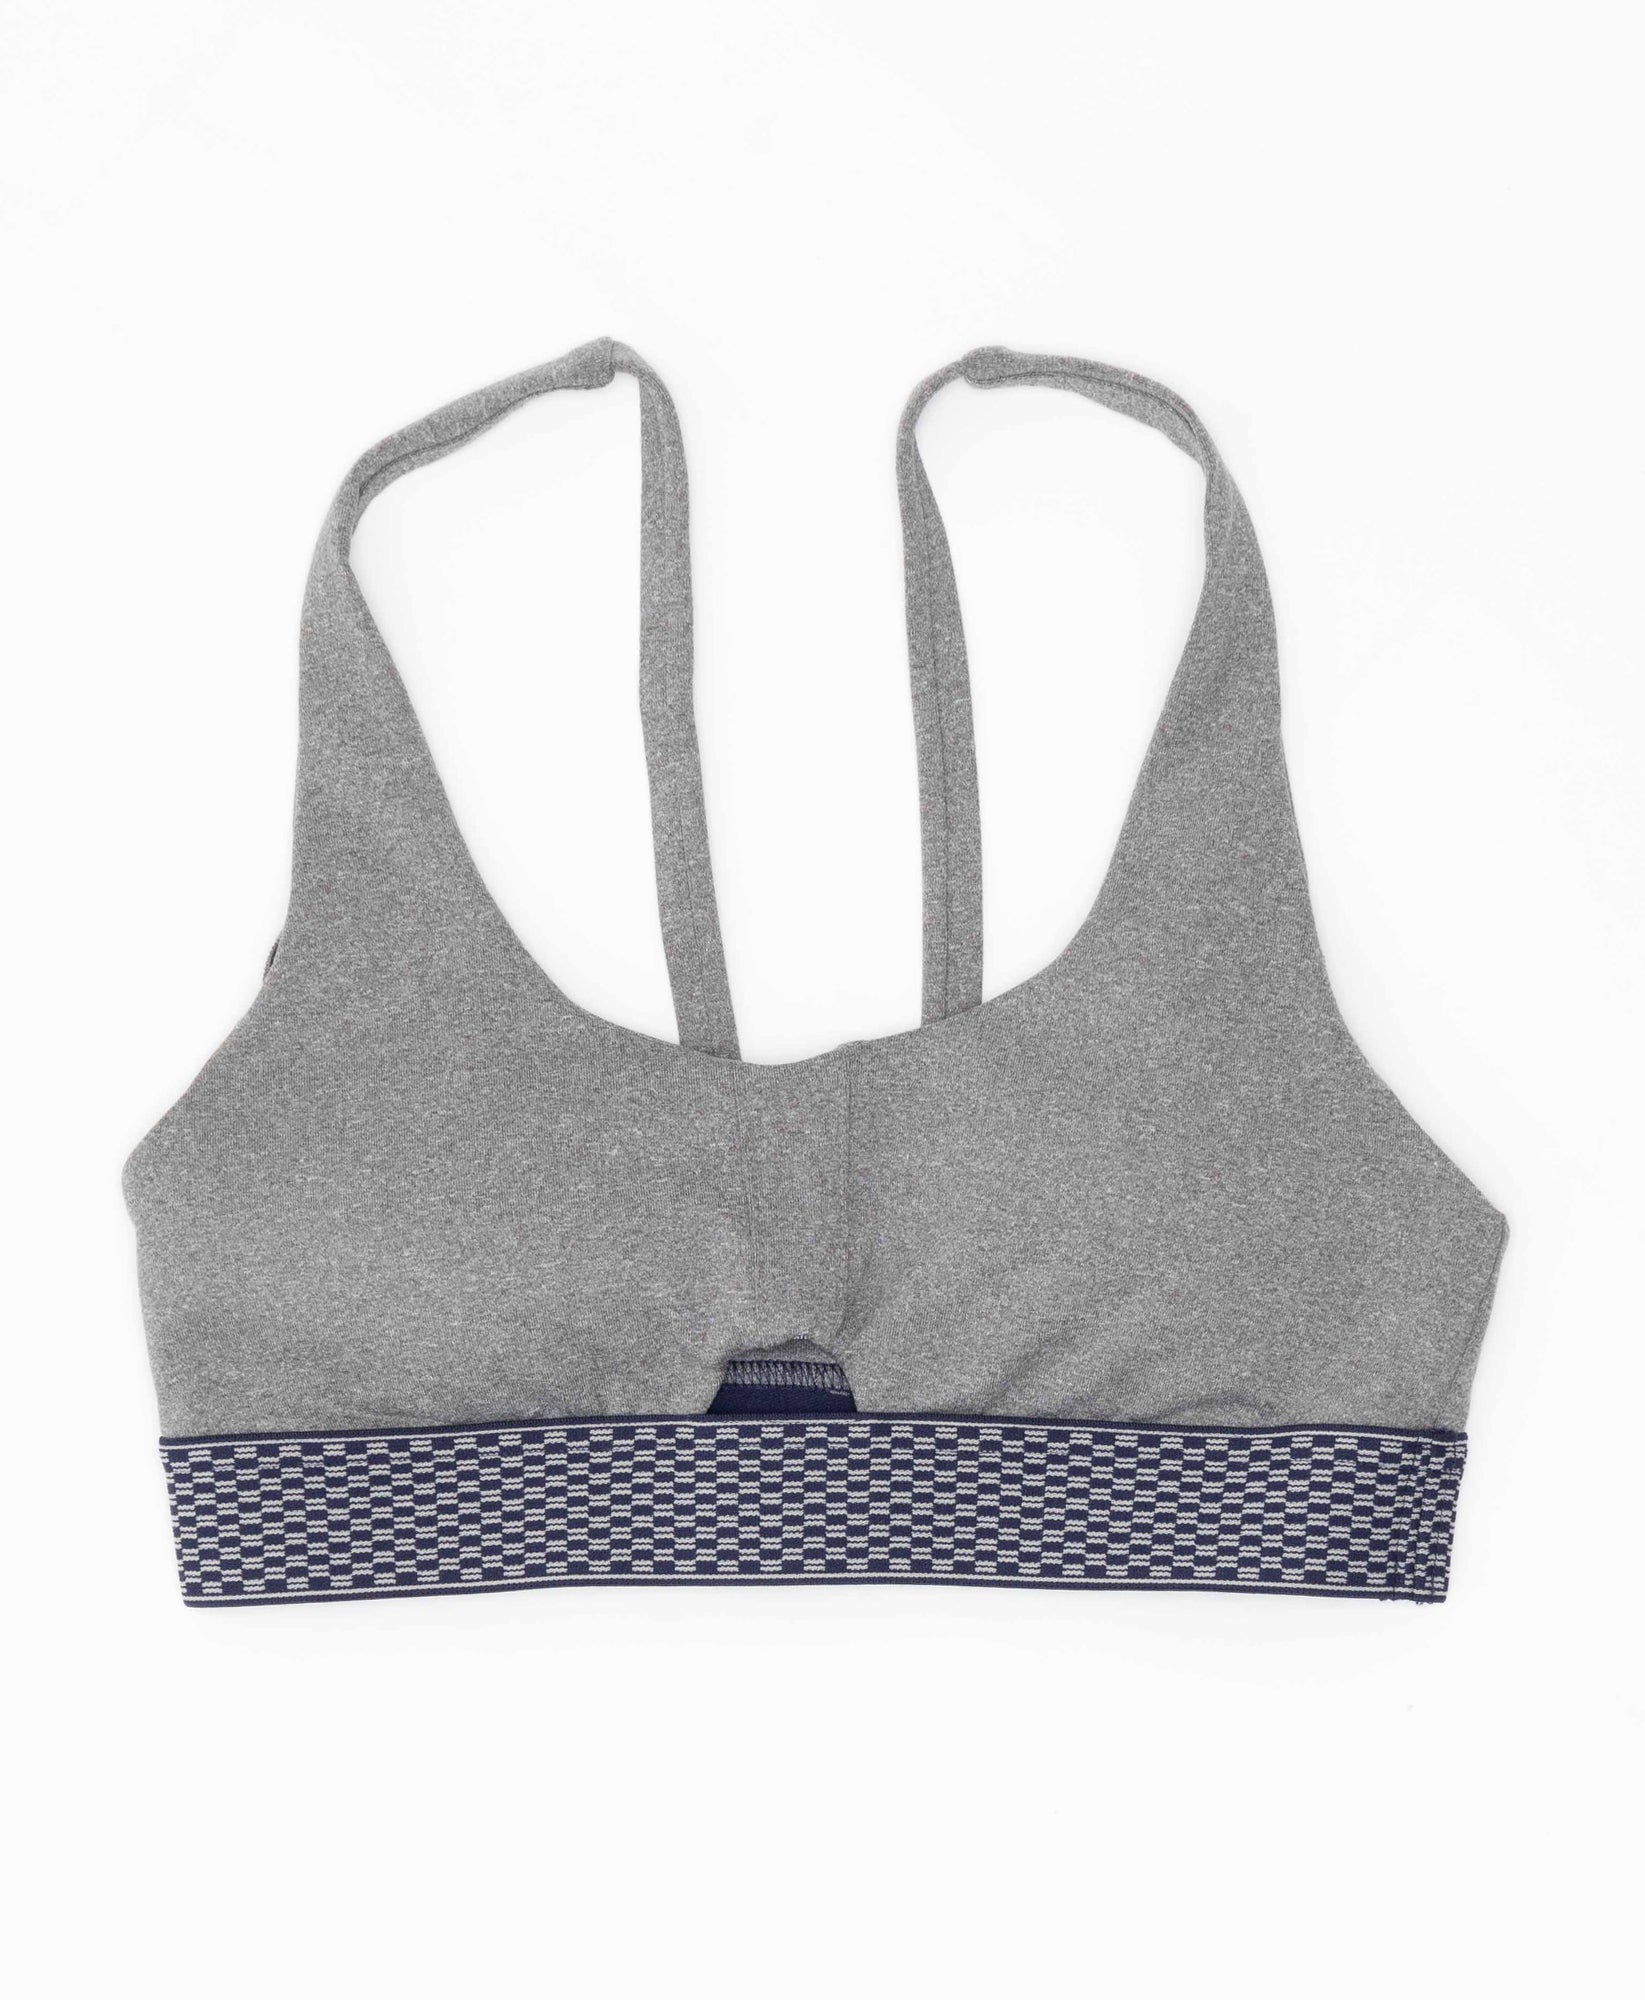 Women's Keyhole Bra in Sport Grey Made With Recycled Nylon – Wear